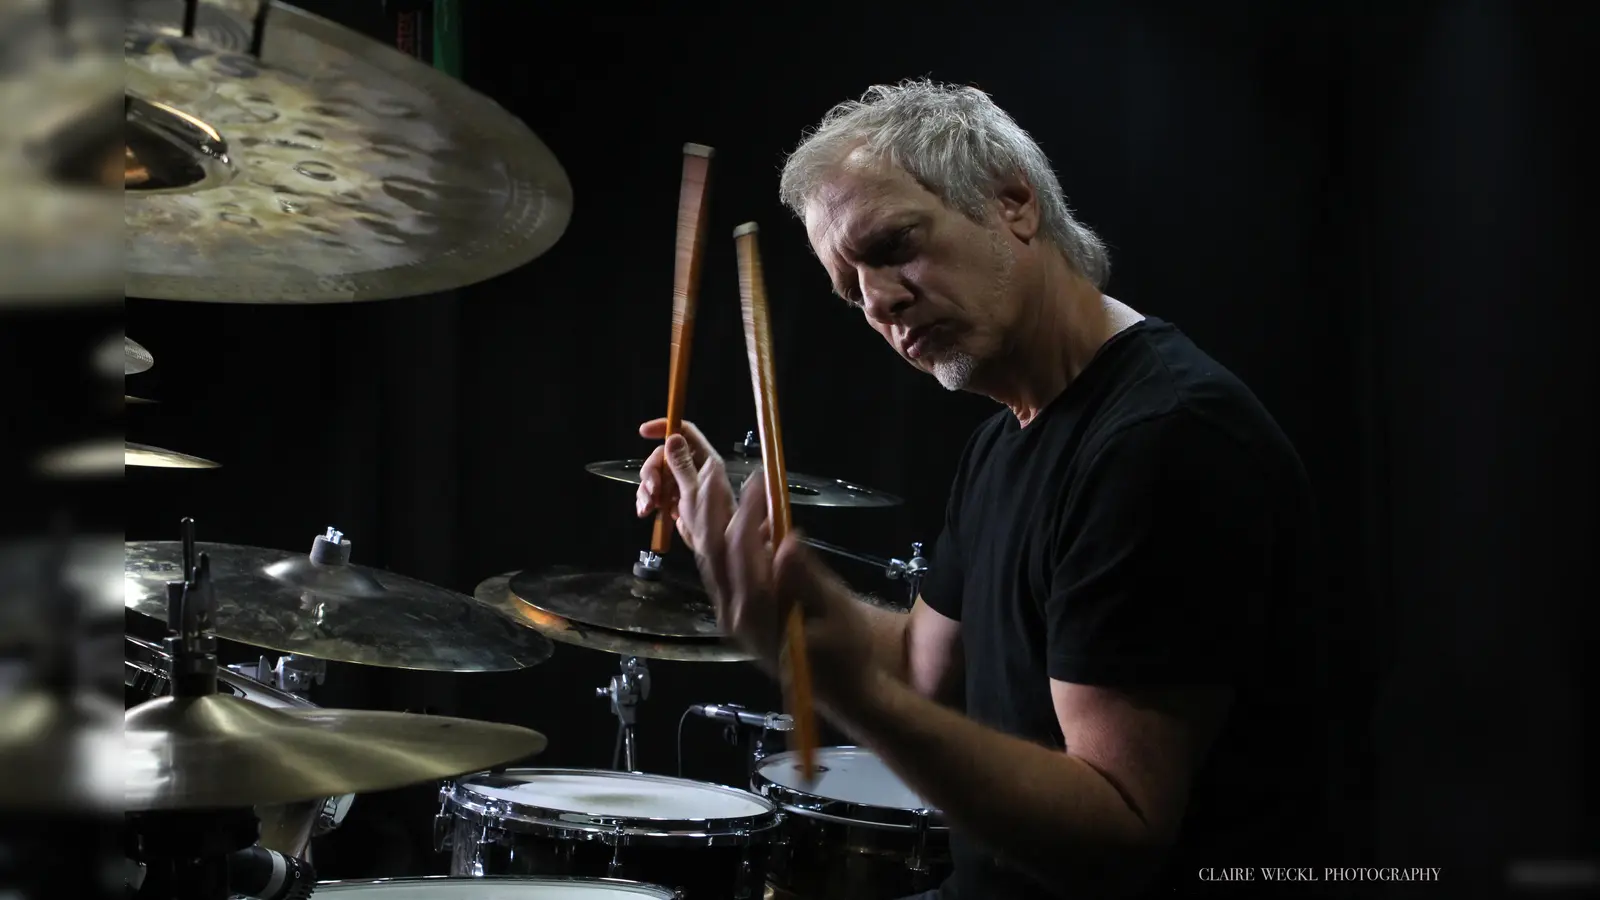 Dave Weckl/Tom Kennedy Project Anfang Mai im Jazz-Club.<br> (Foto: privat)